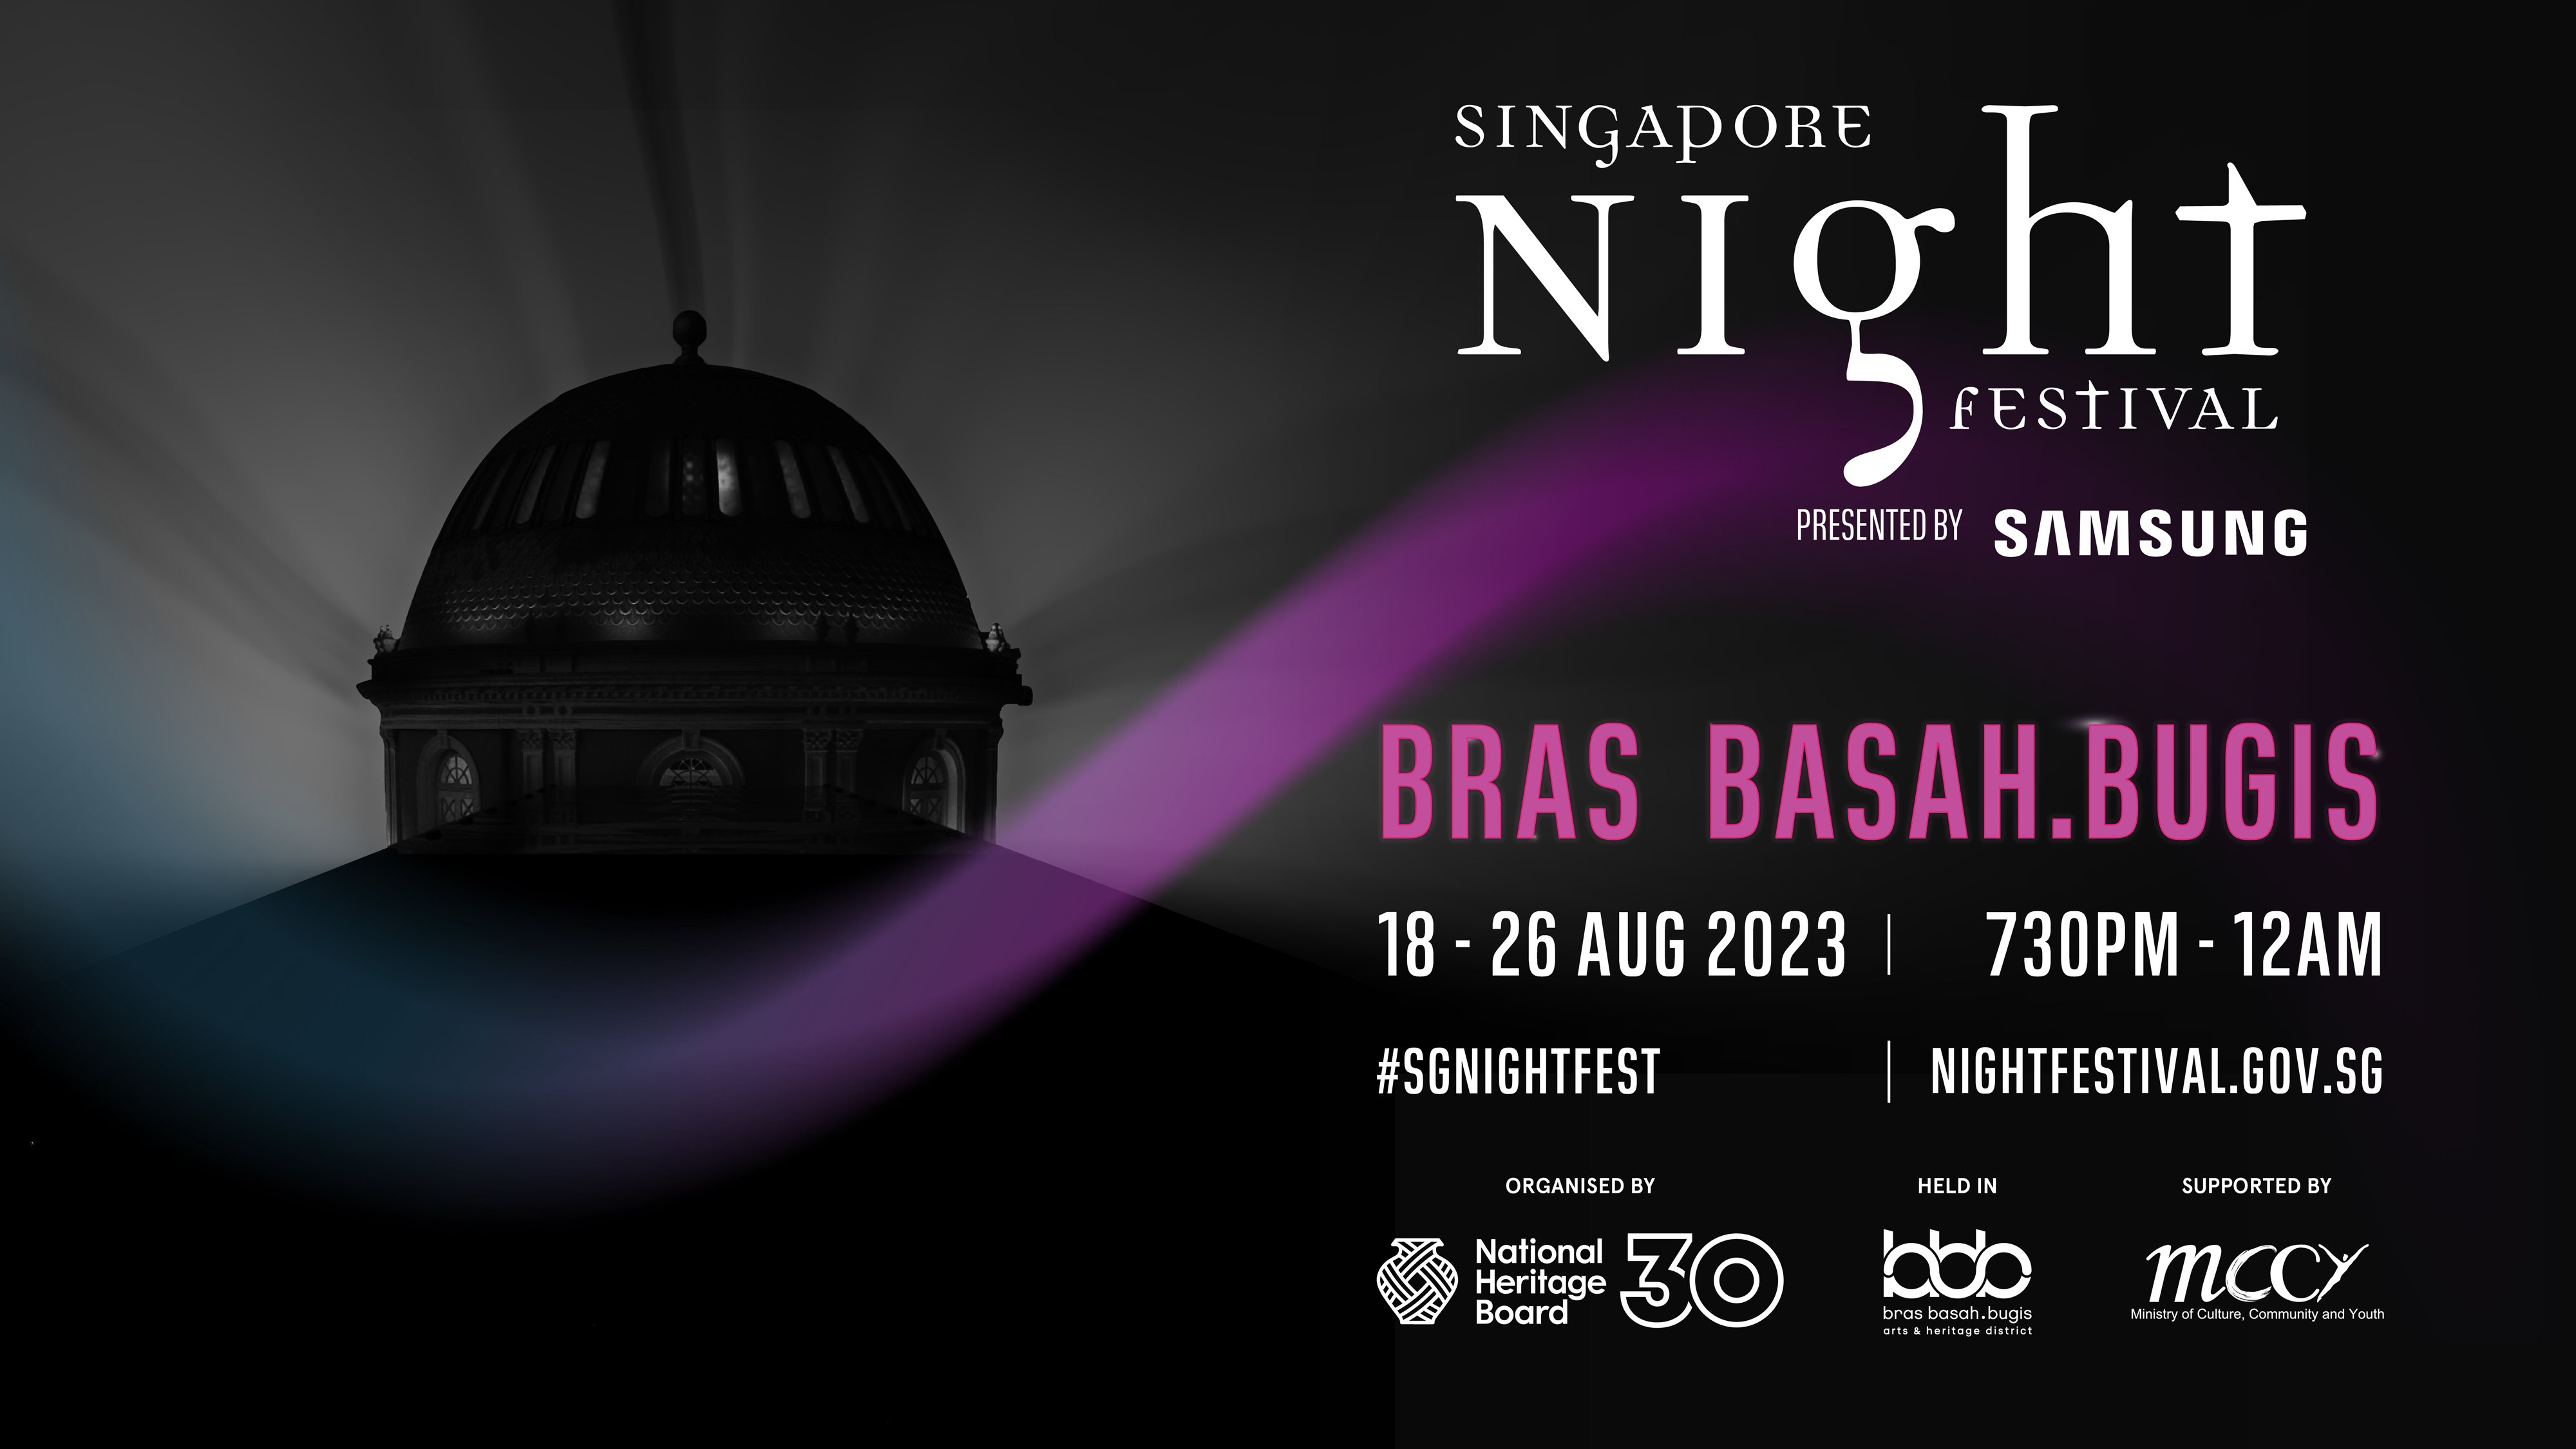 Organised by the National Heritage Board, this year’s Singapore Night Festival is set alight by both international and local artists.